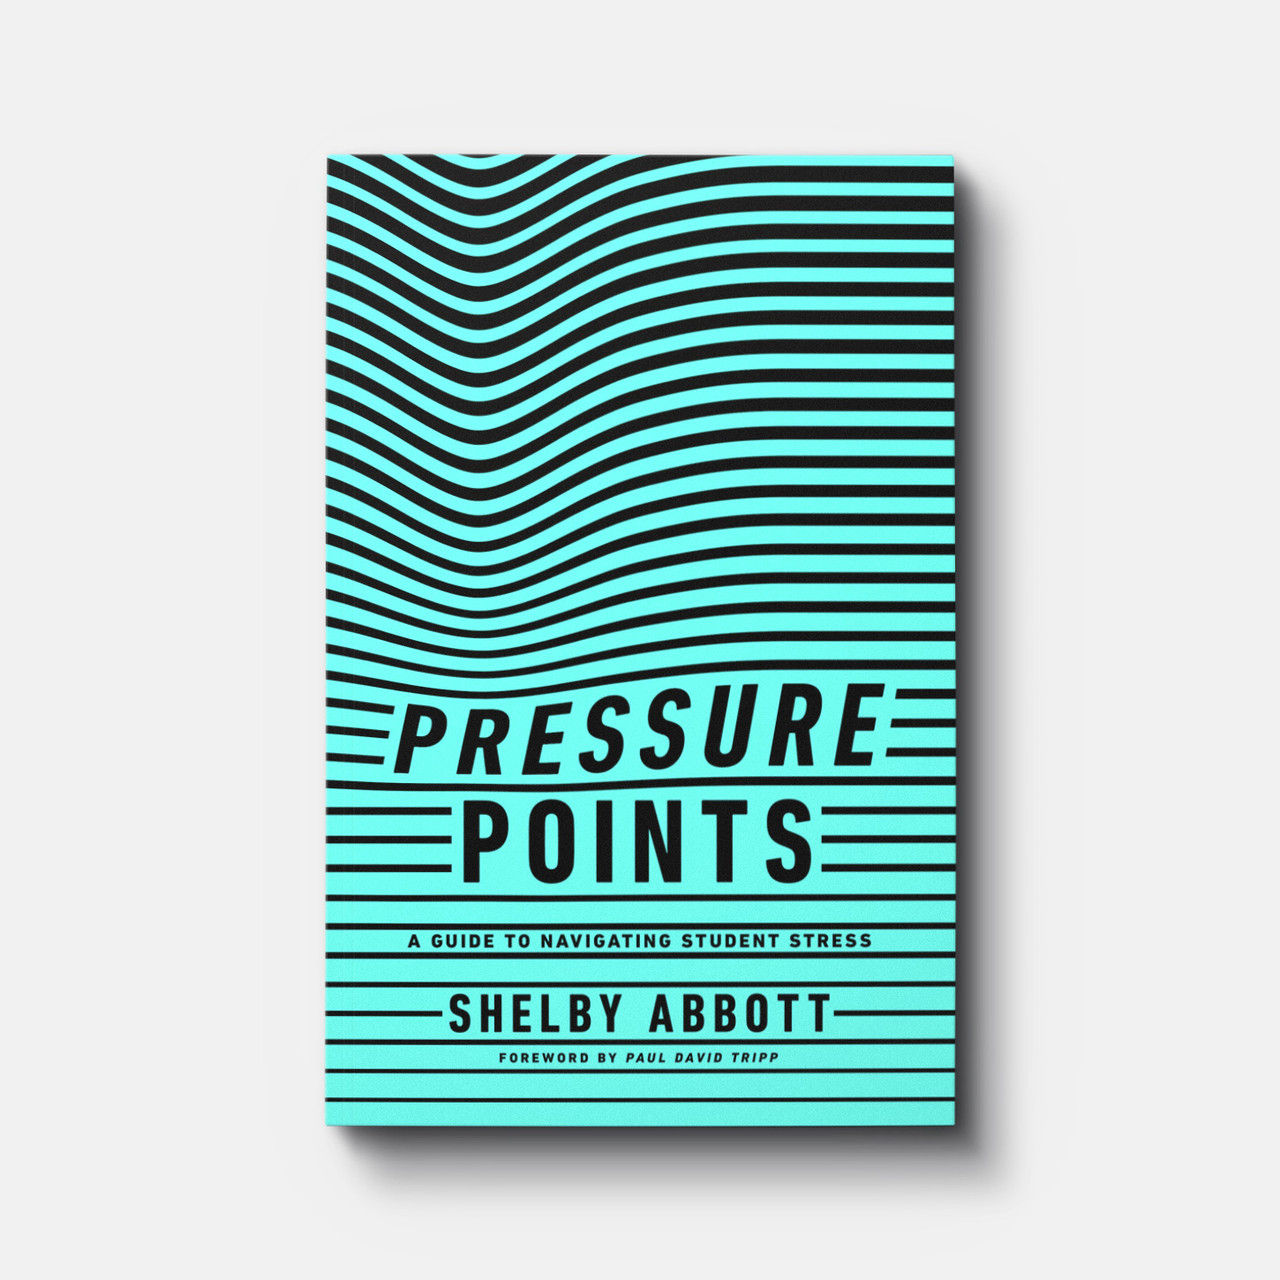 Buy Pressure Points, a Guide to Navigating Student Stress Teen Books